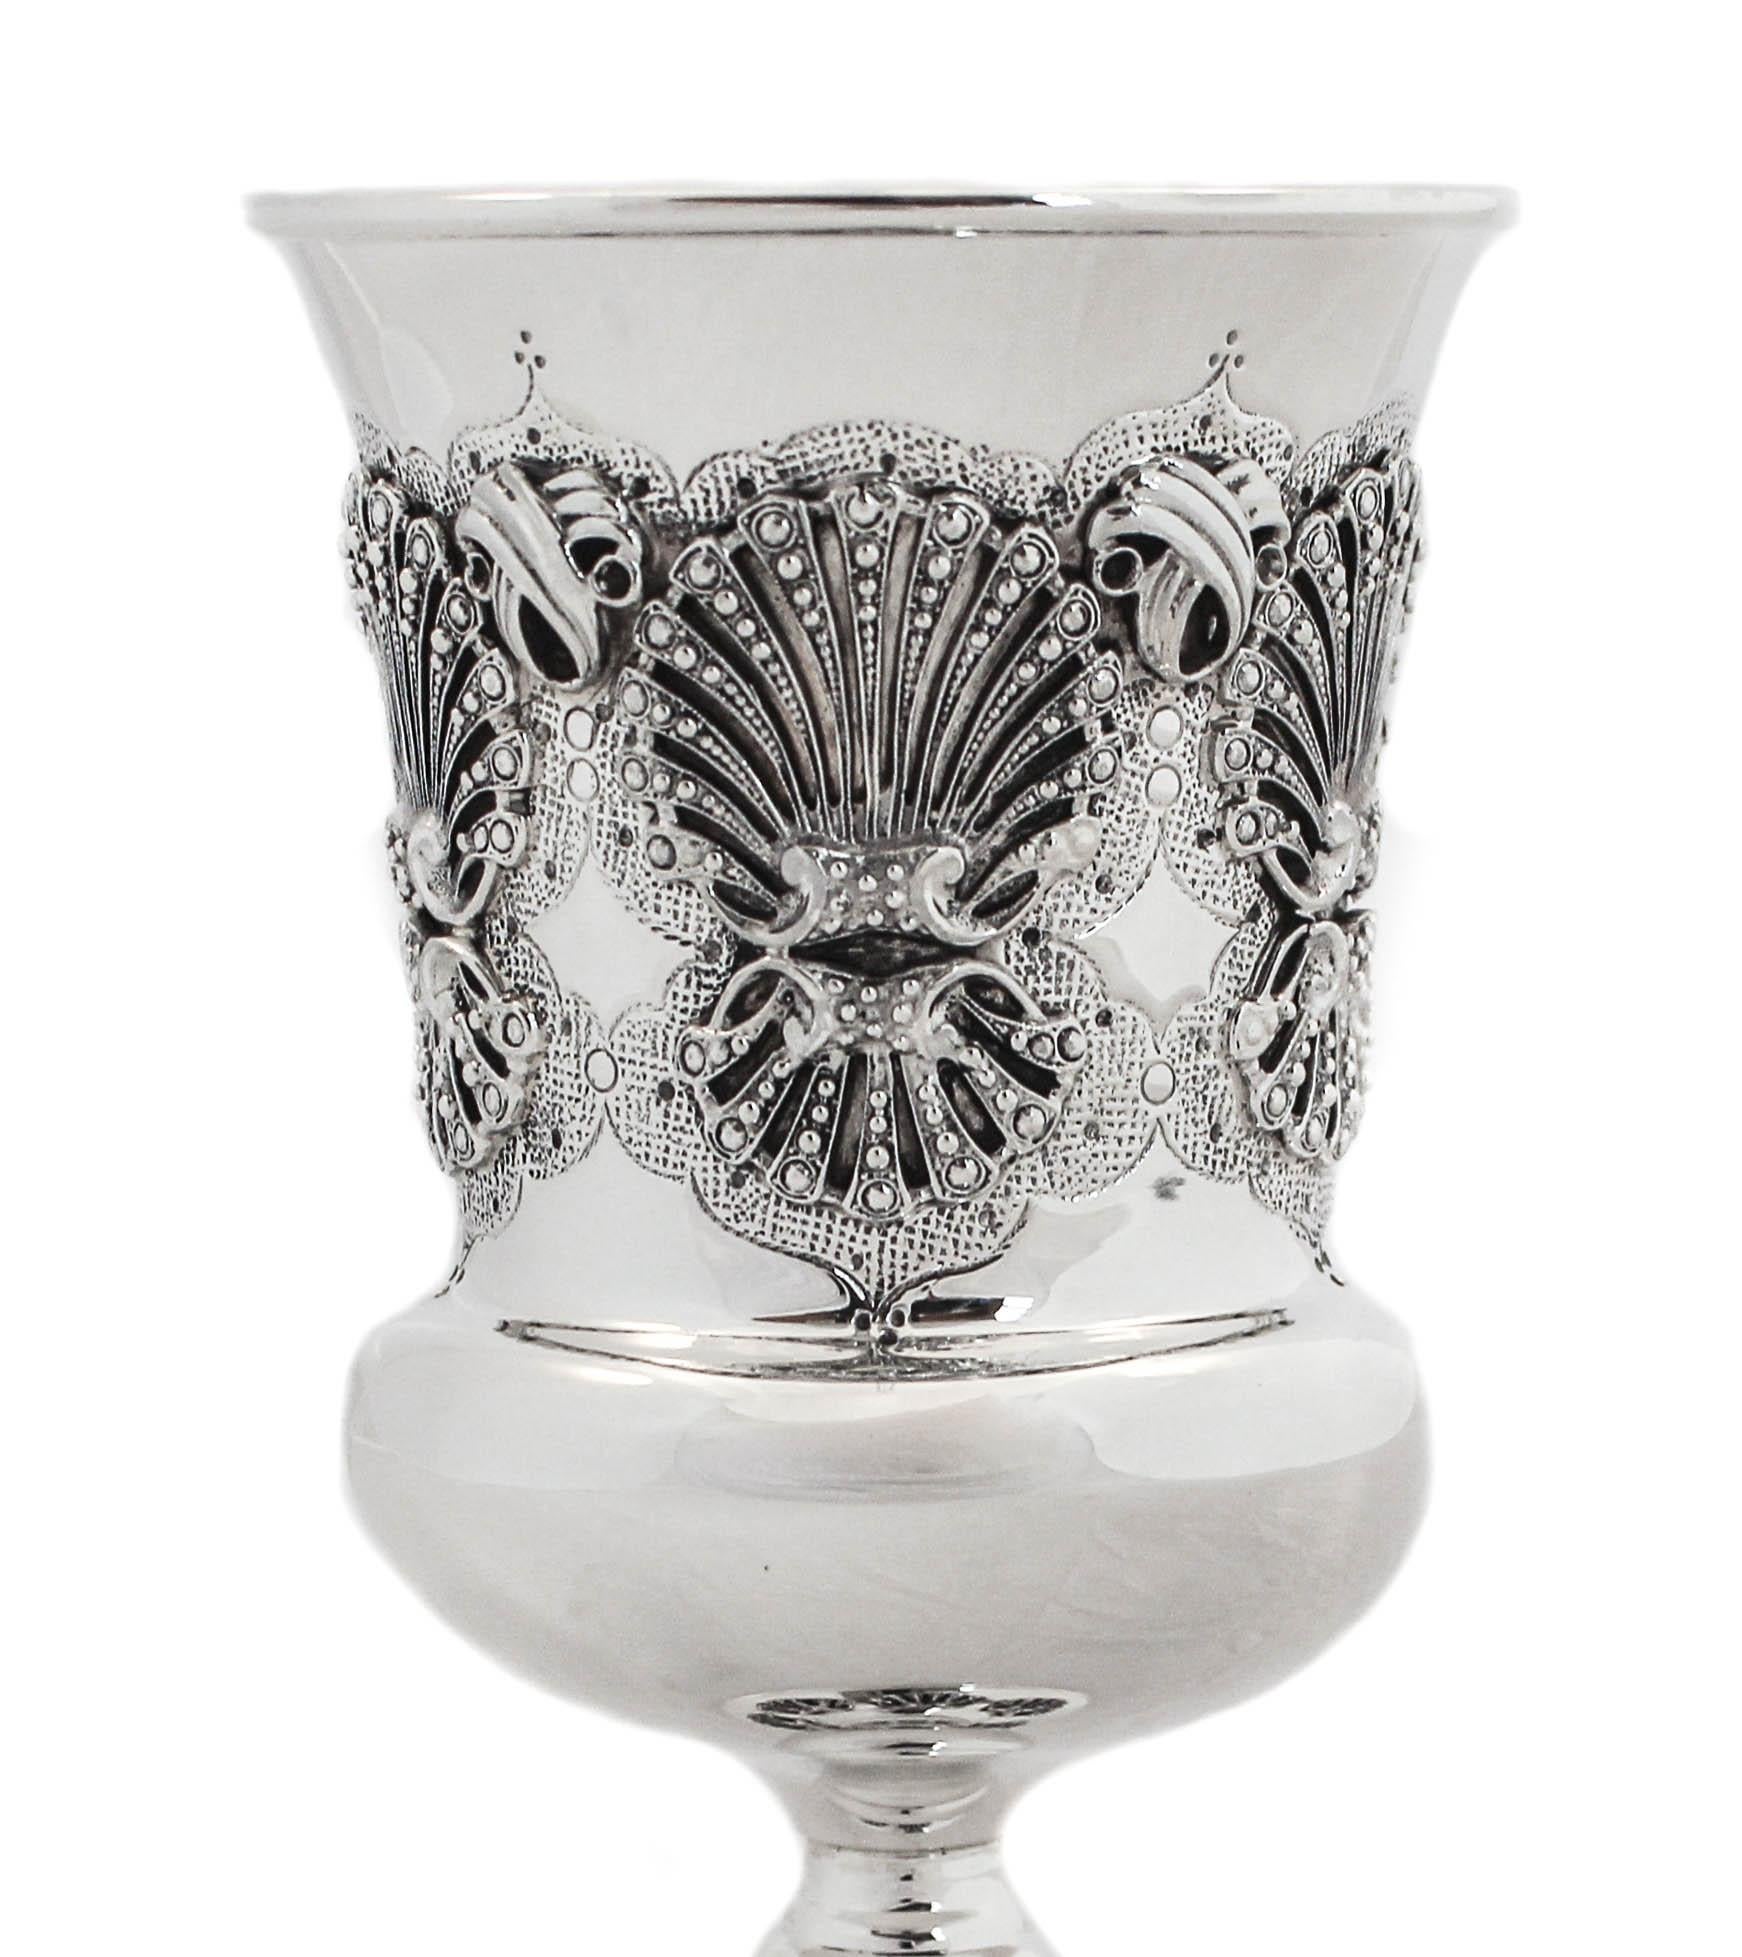 A beautiful sterling silver Kiddush cup (goblet) is being offered. The workmanship around the center and base is gorgeous! A shell-like design with a beaded motif in the middle.